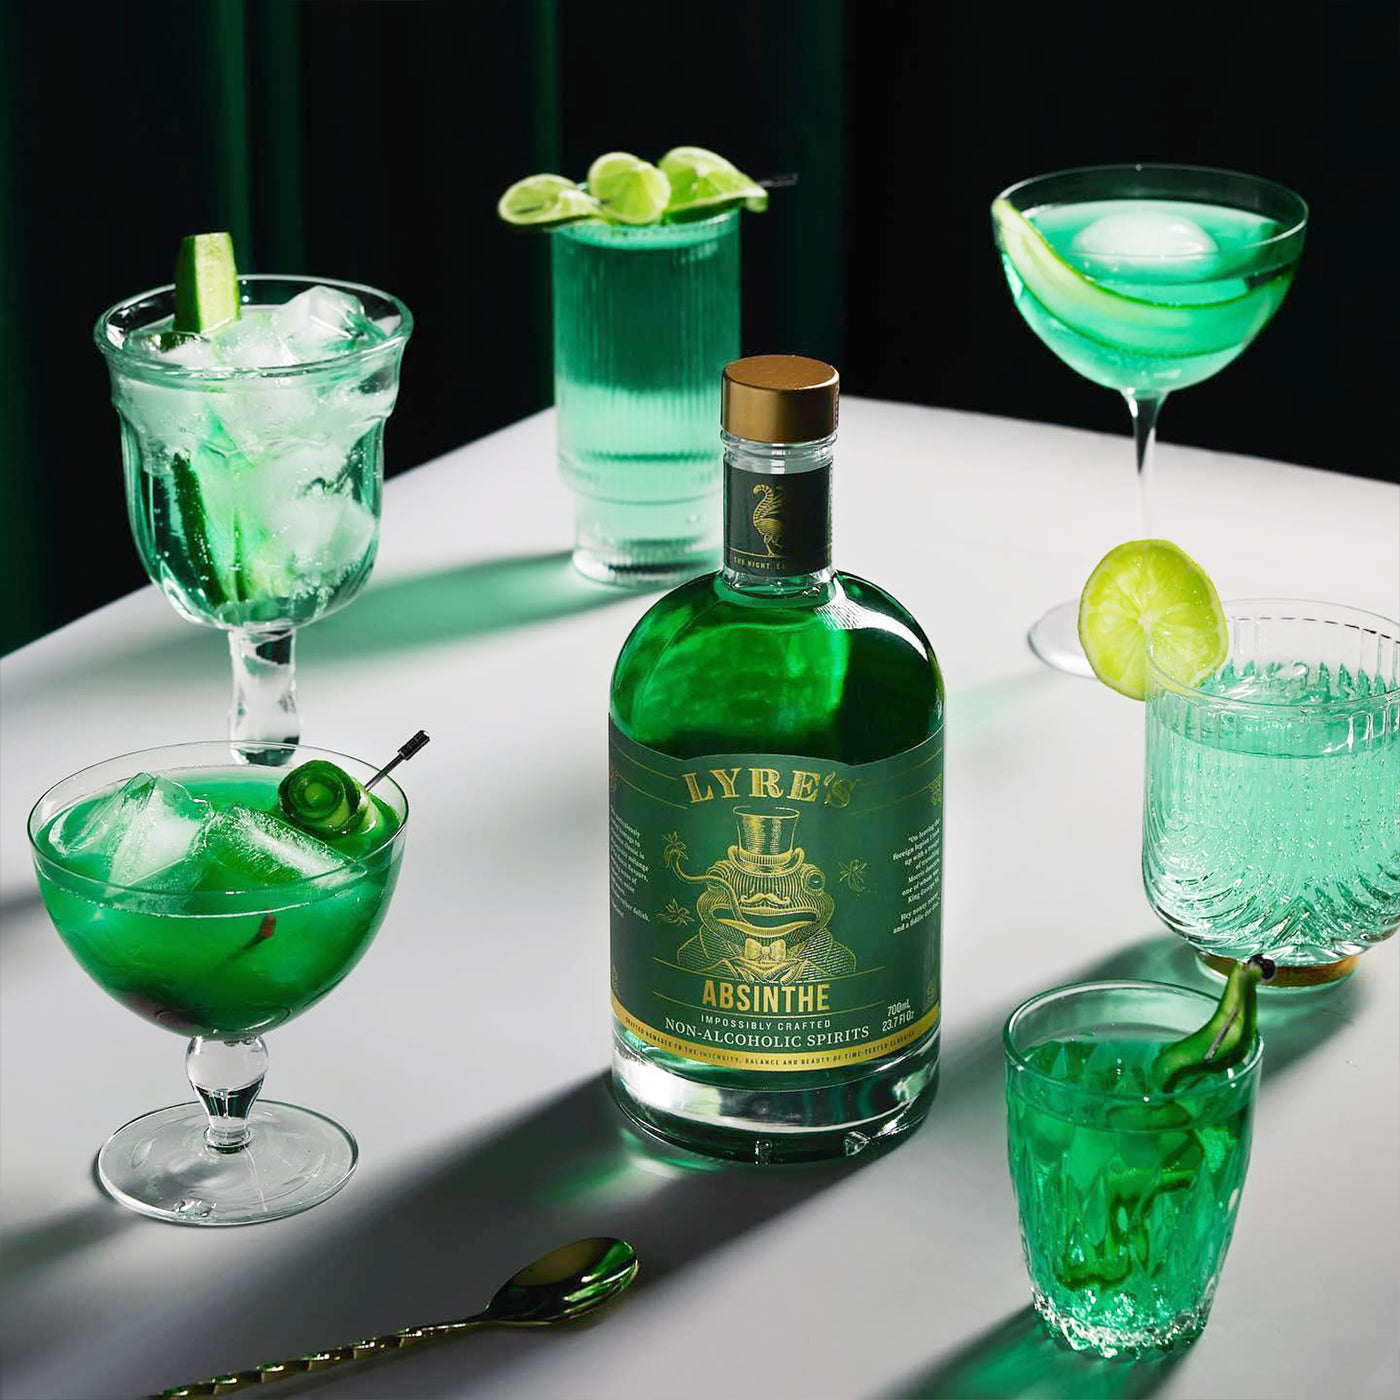 Lyre's non-alcoholic absinthe cocktail